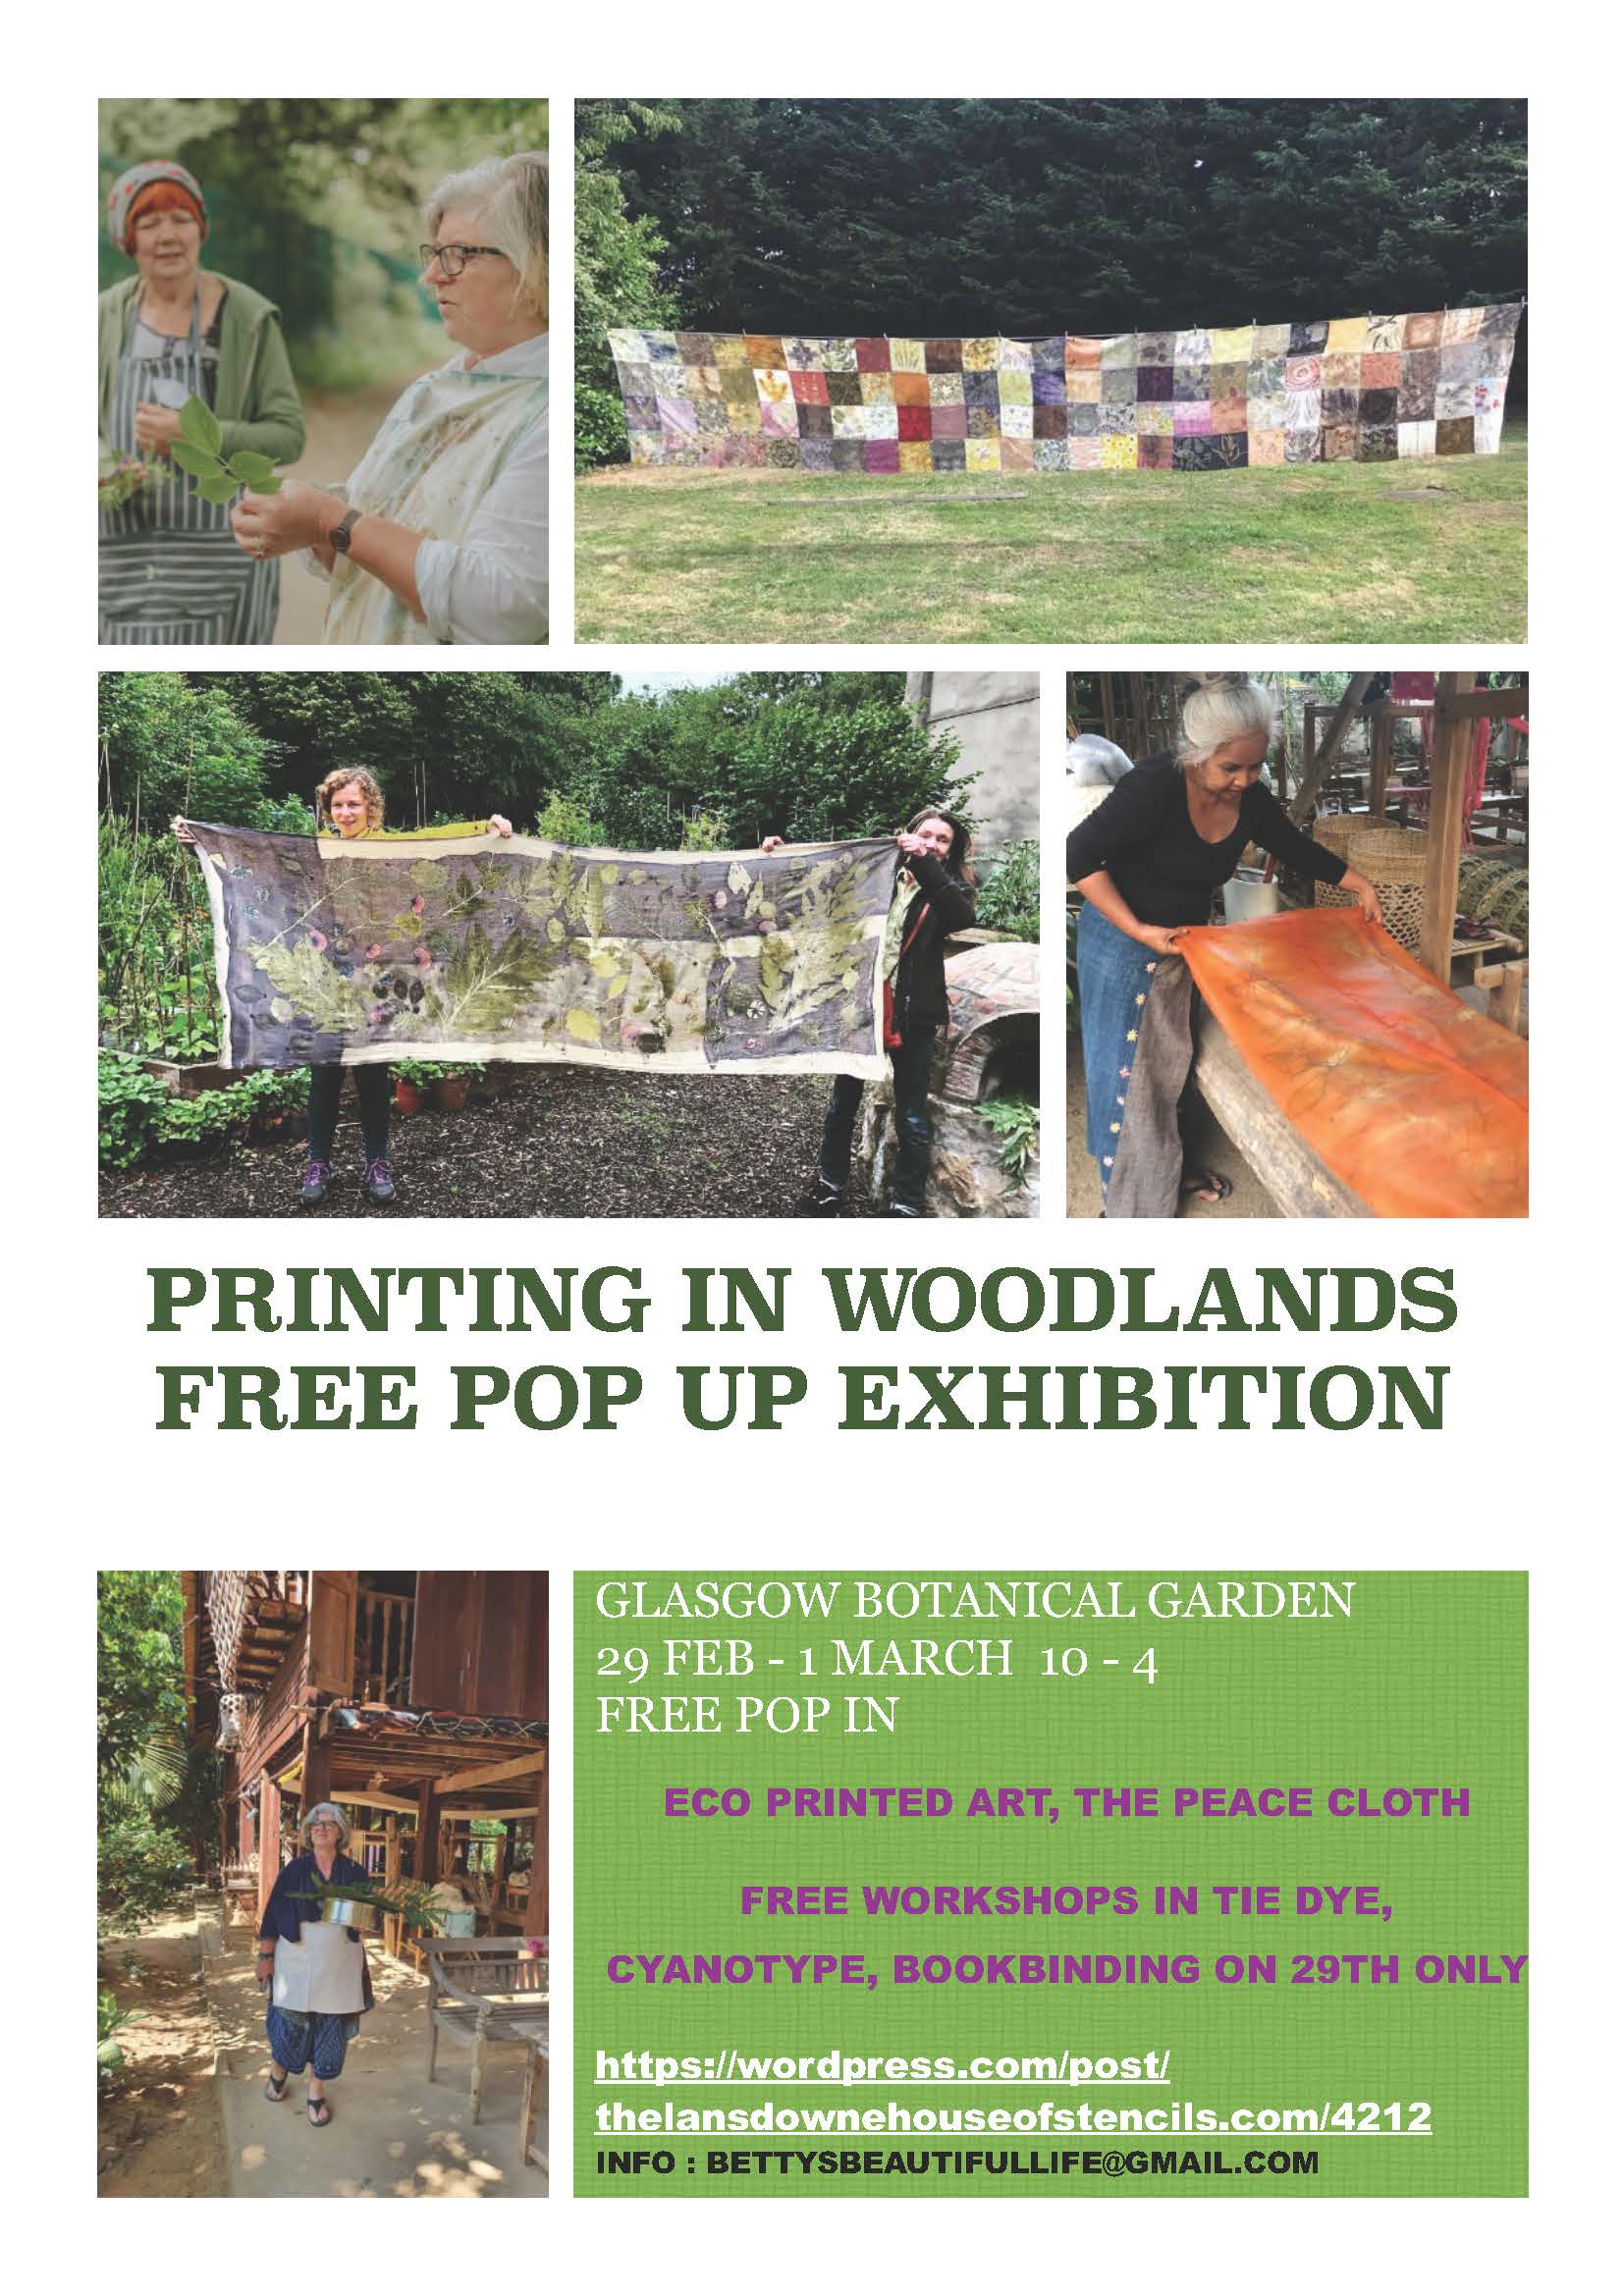 Exhibition: Printing in Woodlands